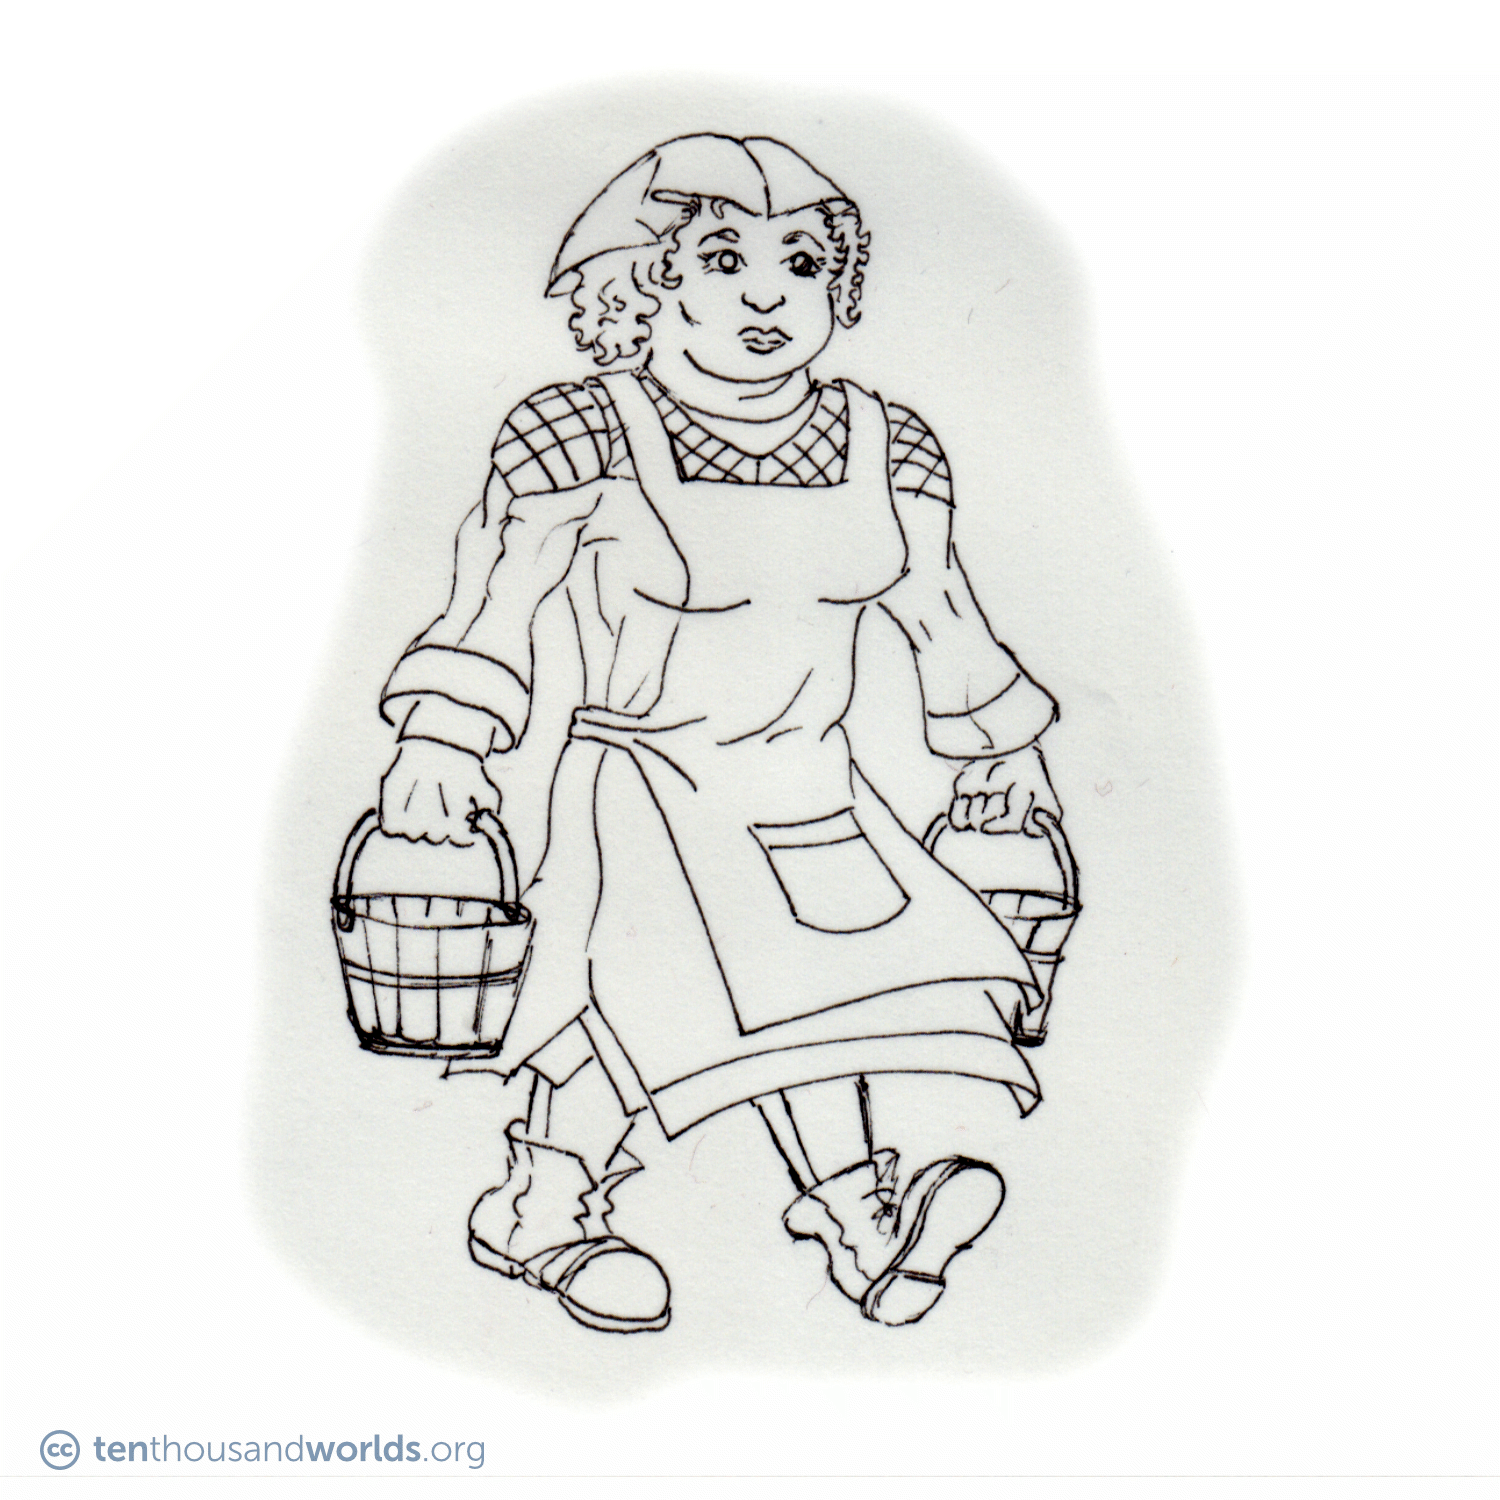 An ink outline of a solidly-built farm woman in a neckerchief, multilayered dress, apron, and poorly-repaired boots, hauling two wooden buckets.